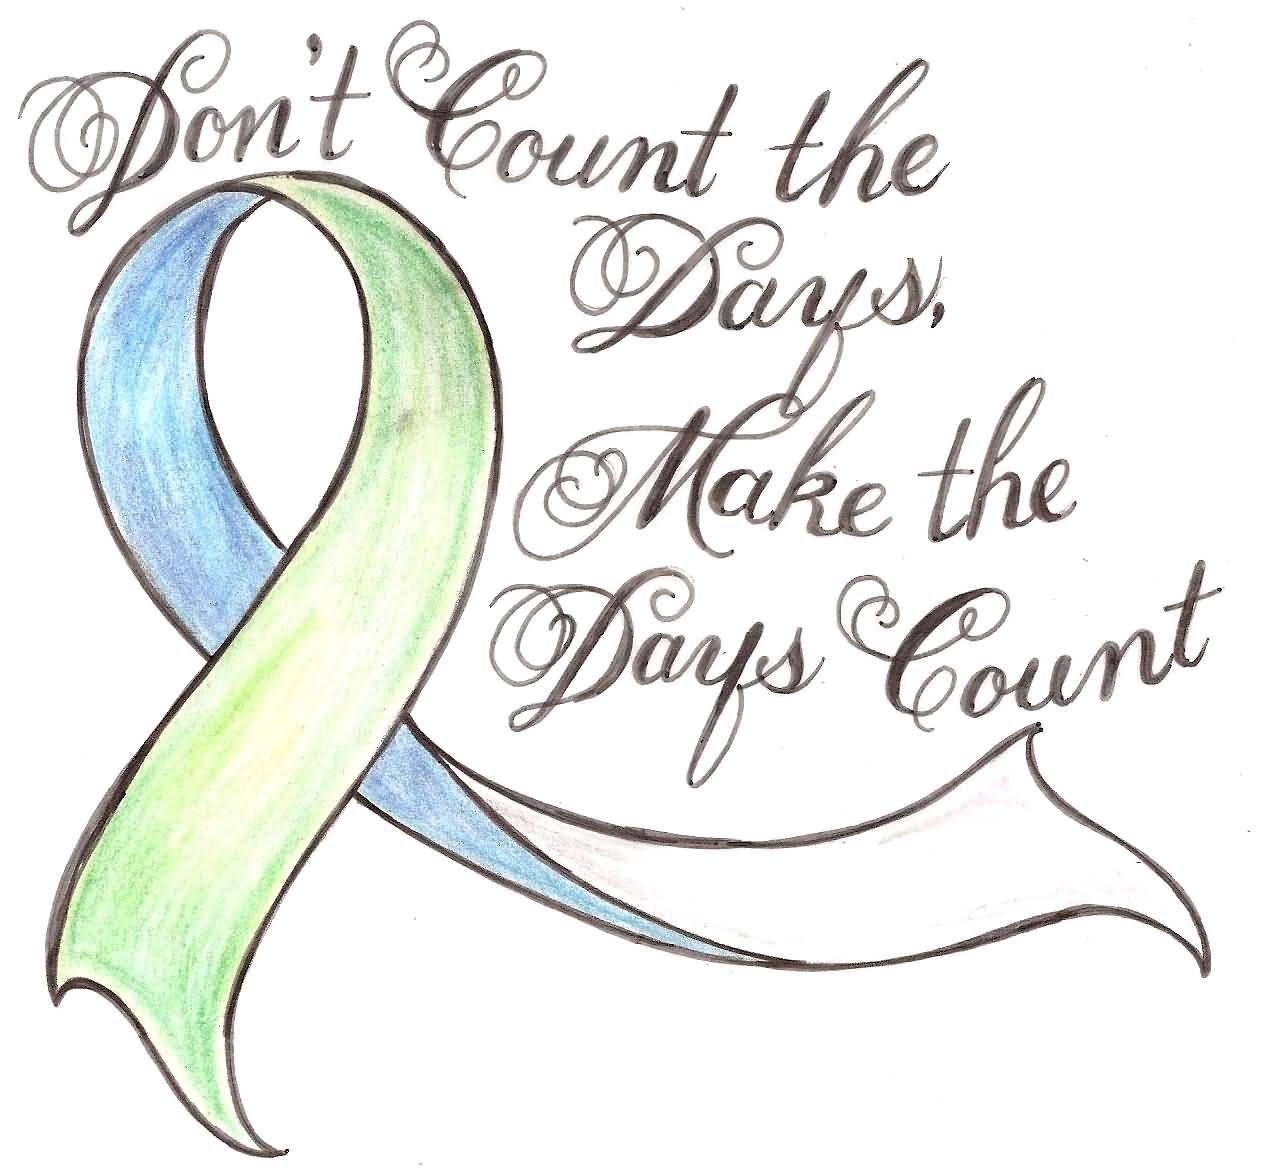 Don’t count the days, make the days count World Cancer Day painting